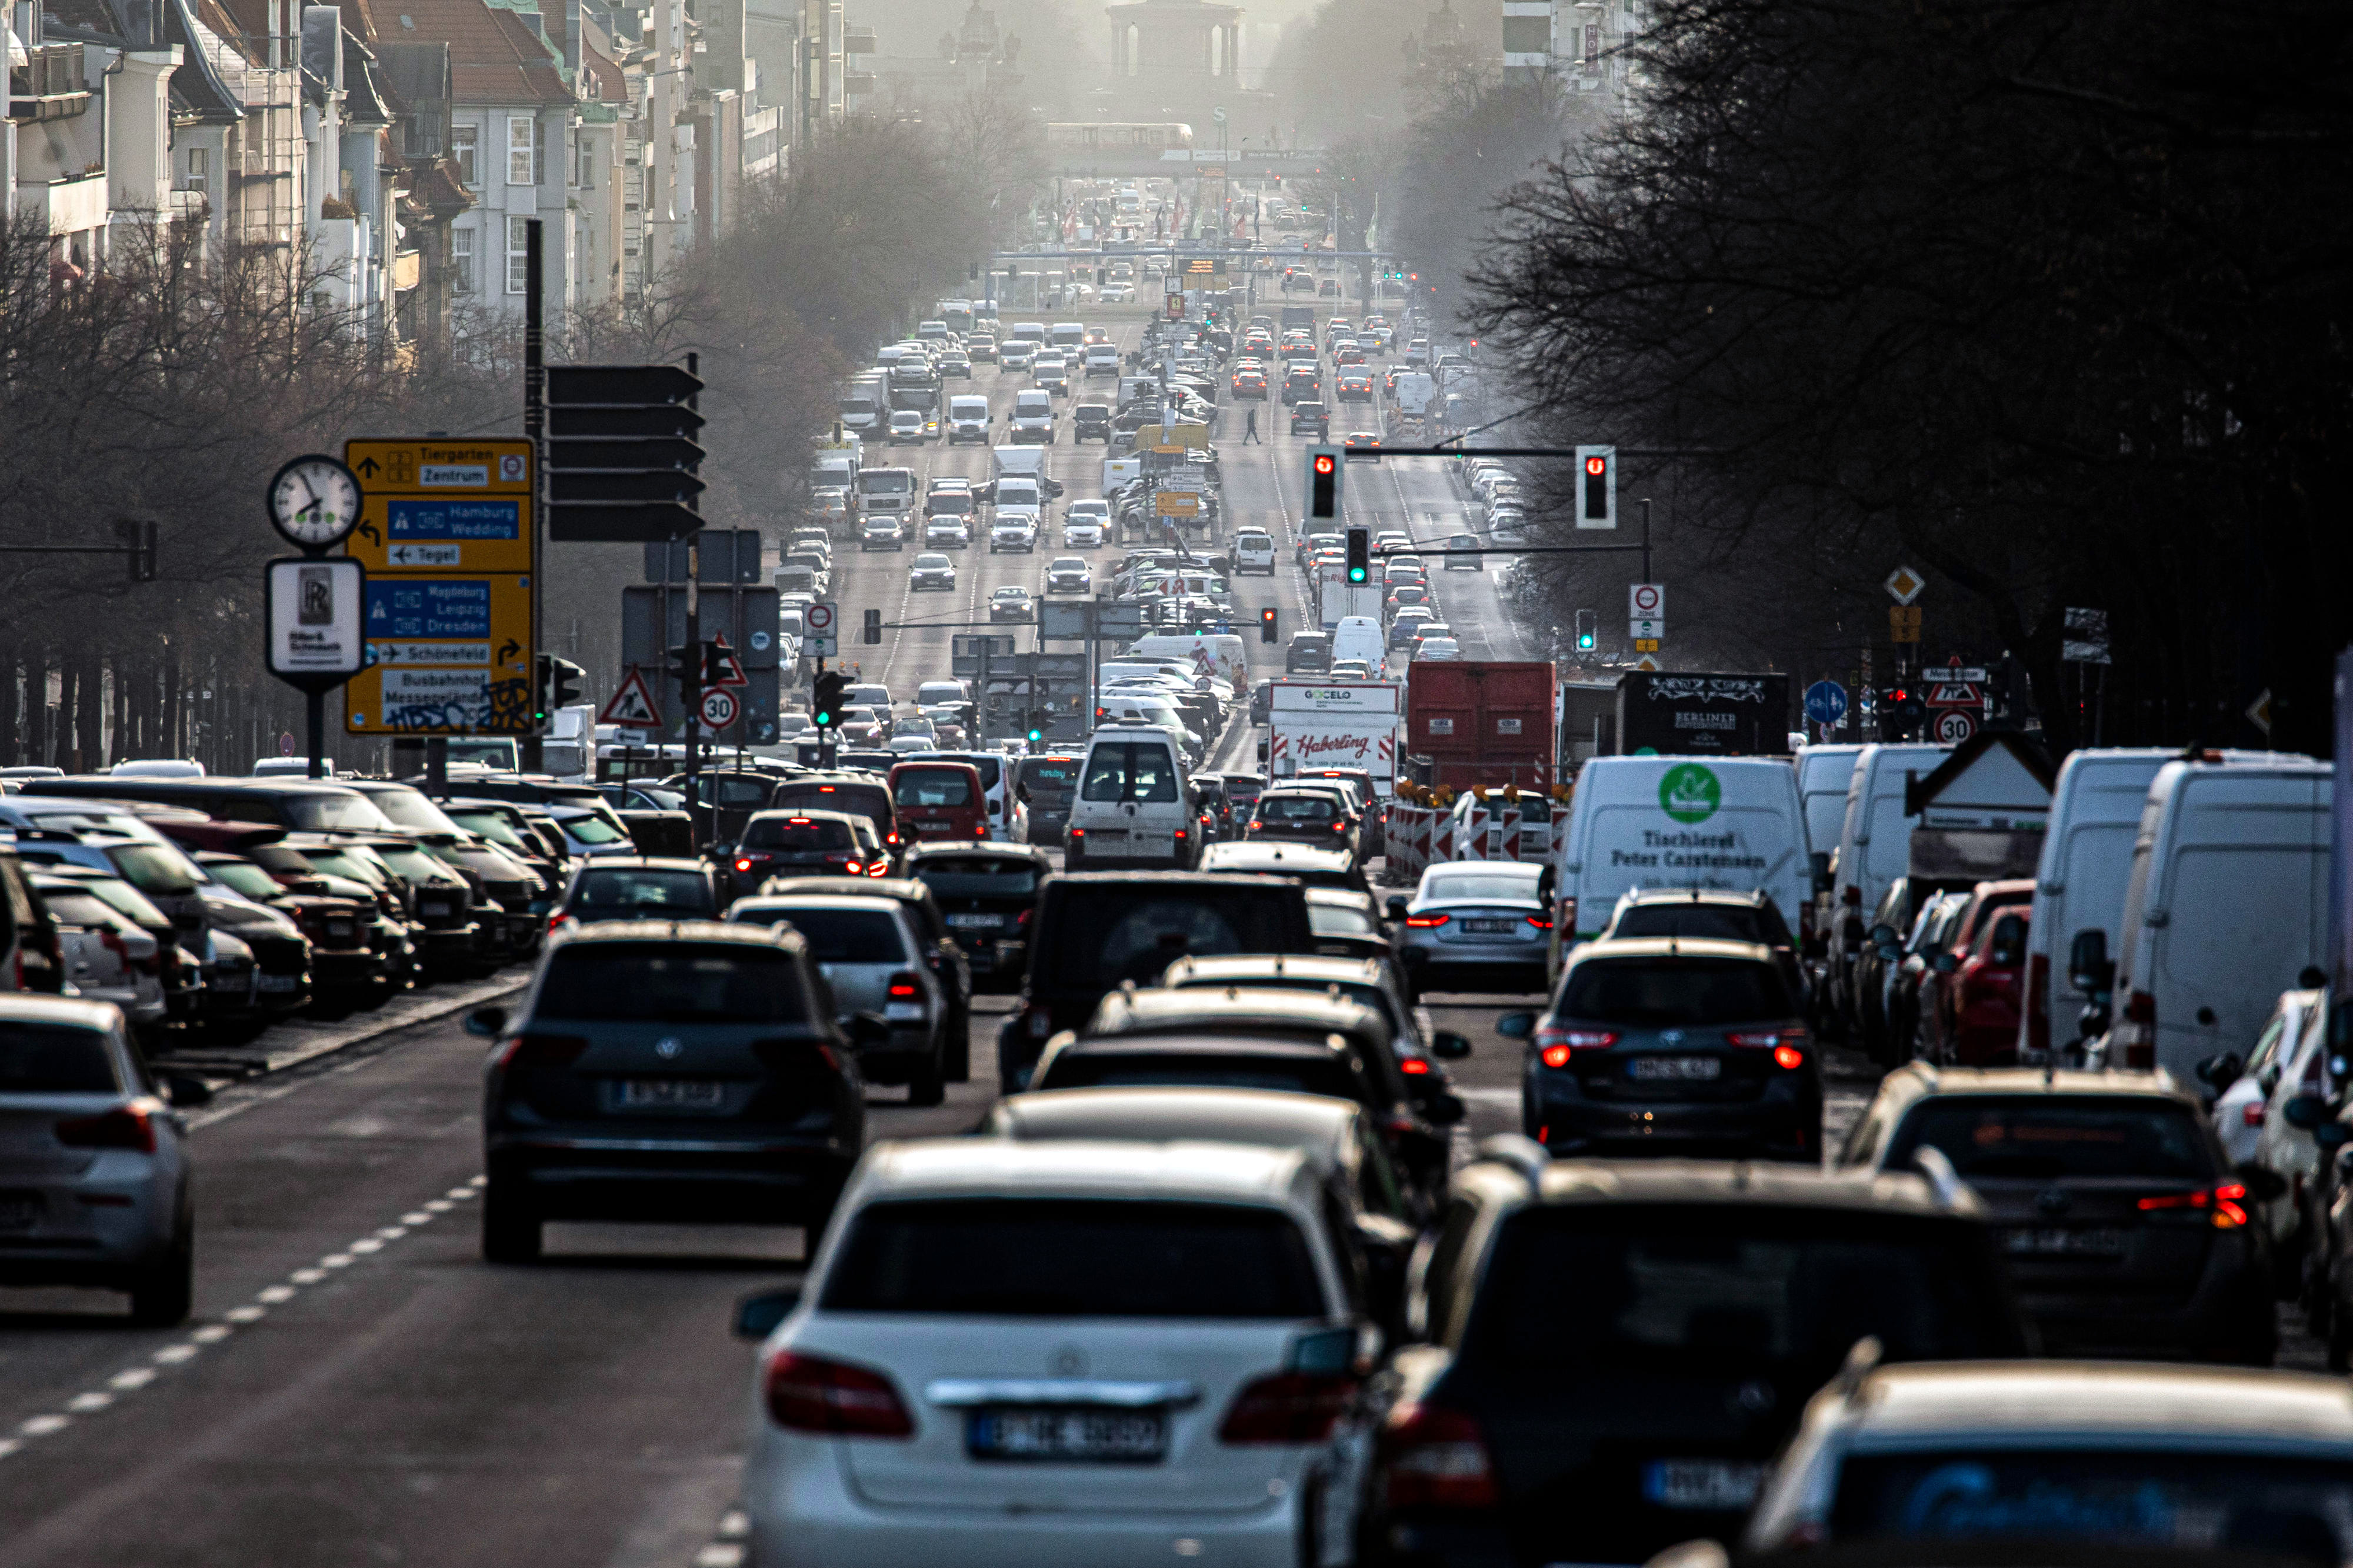 Road traffic in Berlin, numerous cars driving closely packed on a multi-lane road